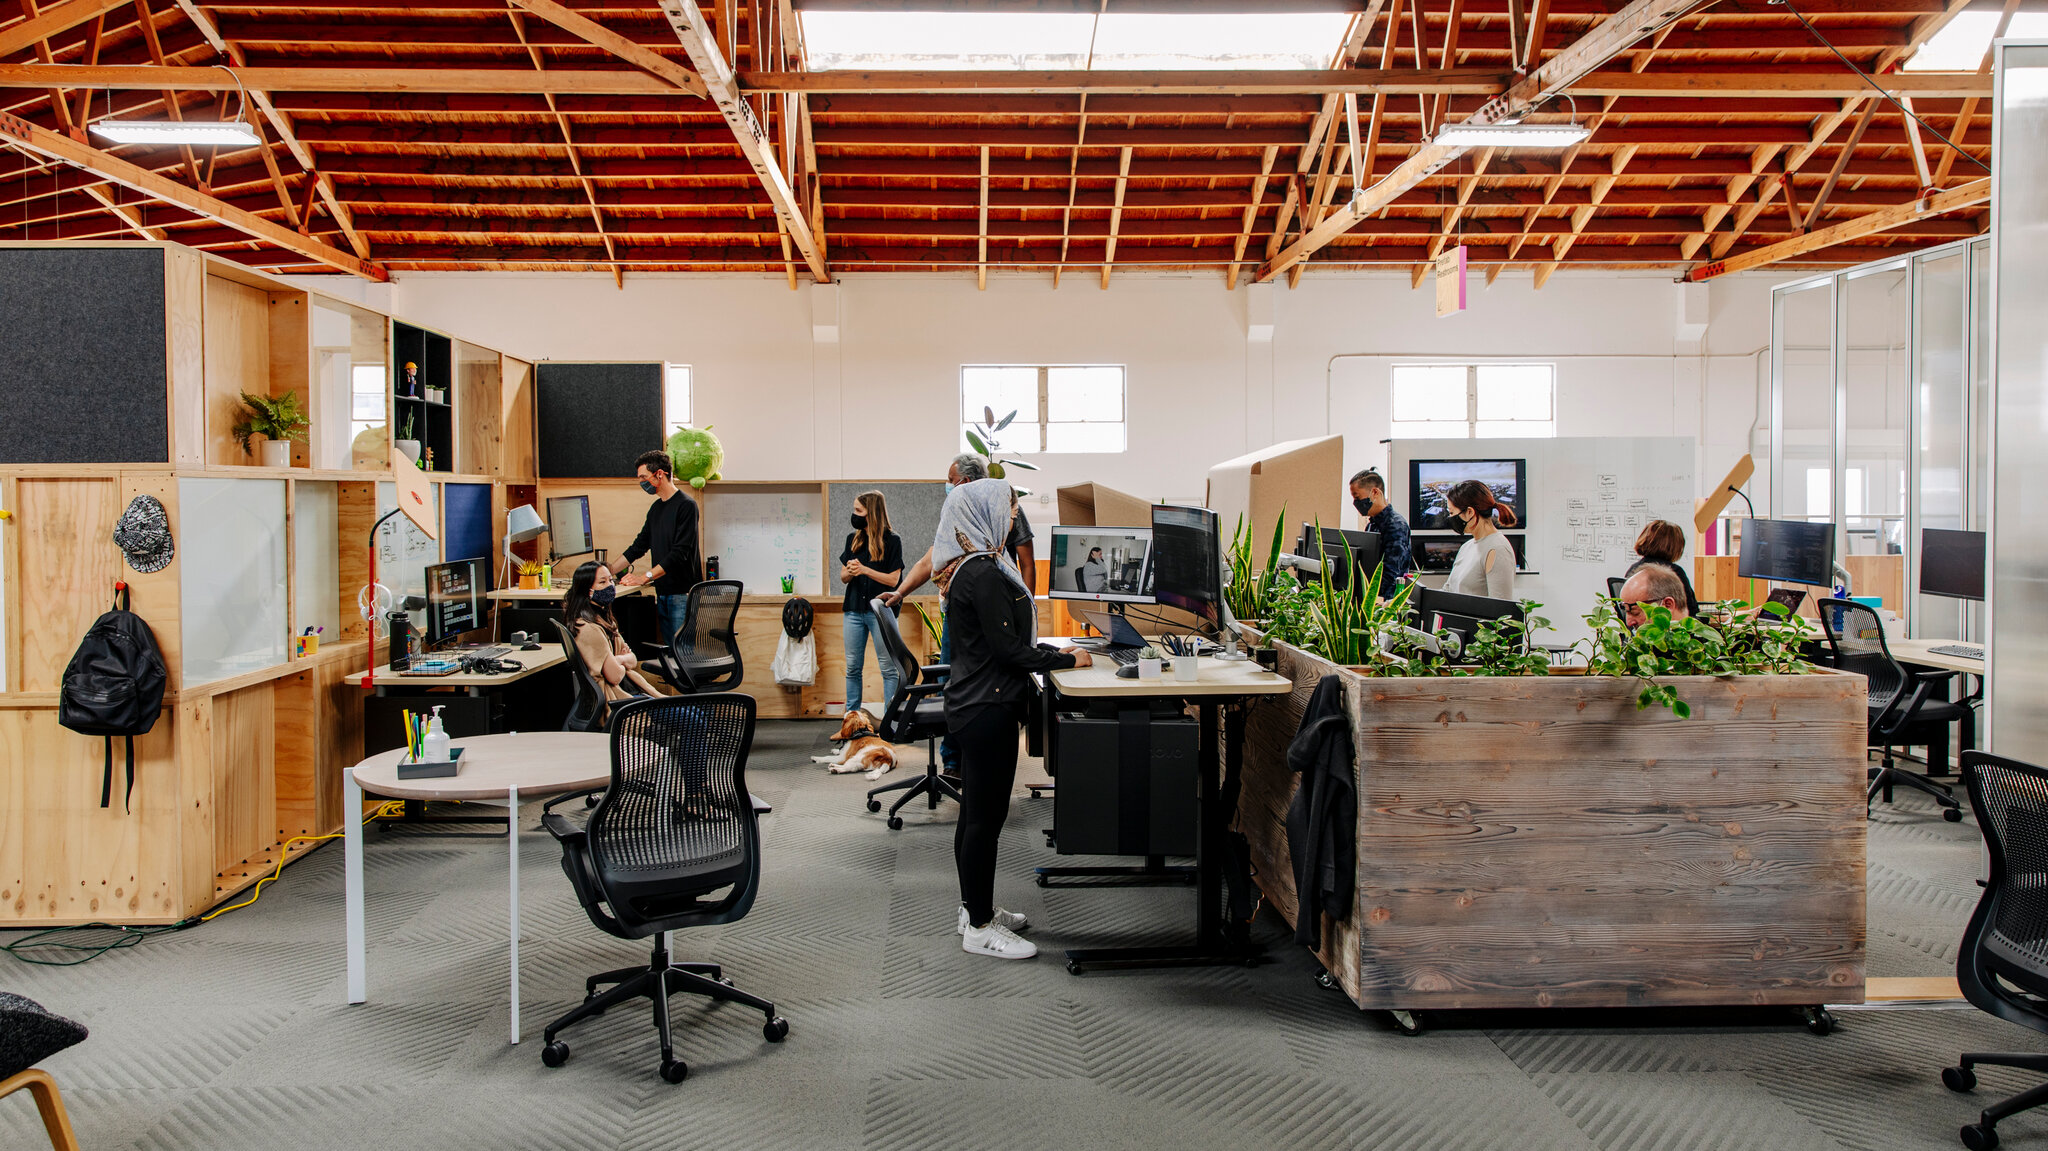 Two IT companies open offices closer to employees to lure them back to the workplace - Karma Global